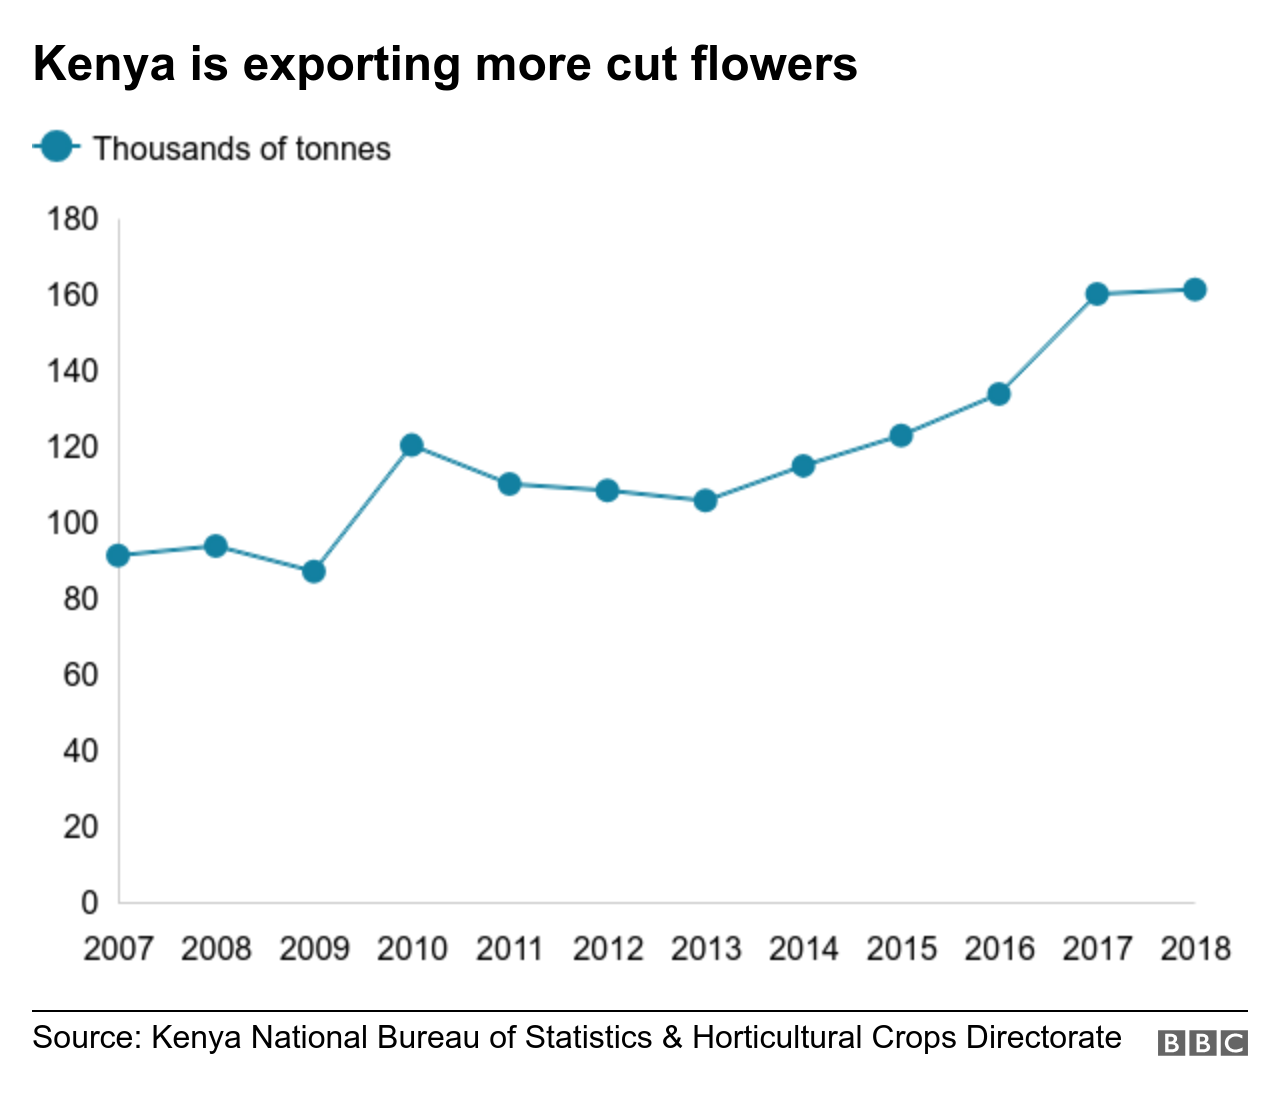 Chart shows how many flowers Kenya exports, which has risen since 2010.